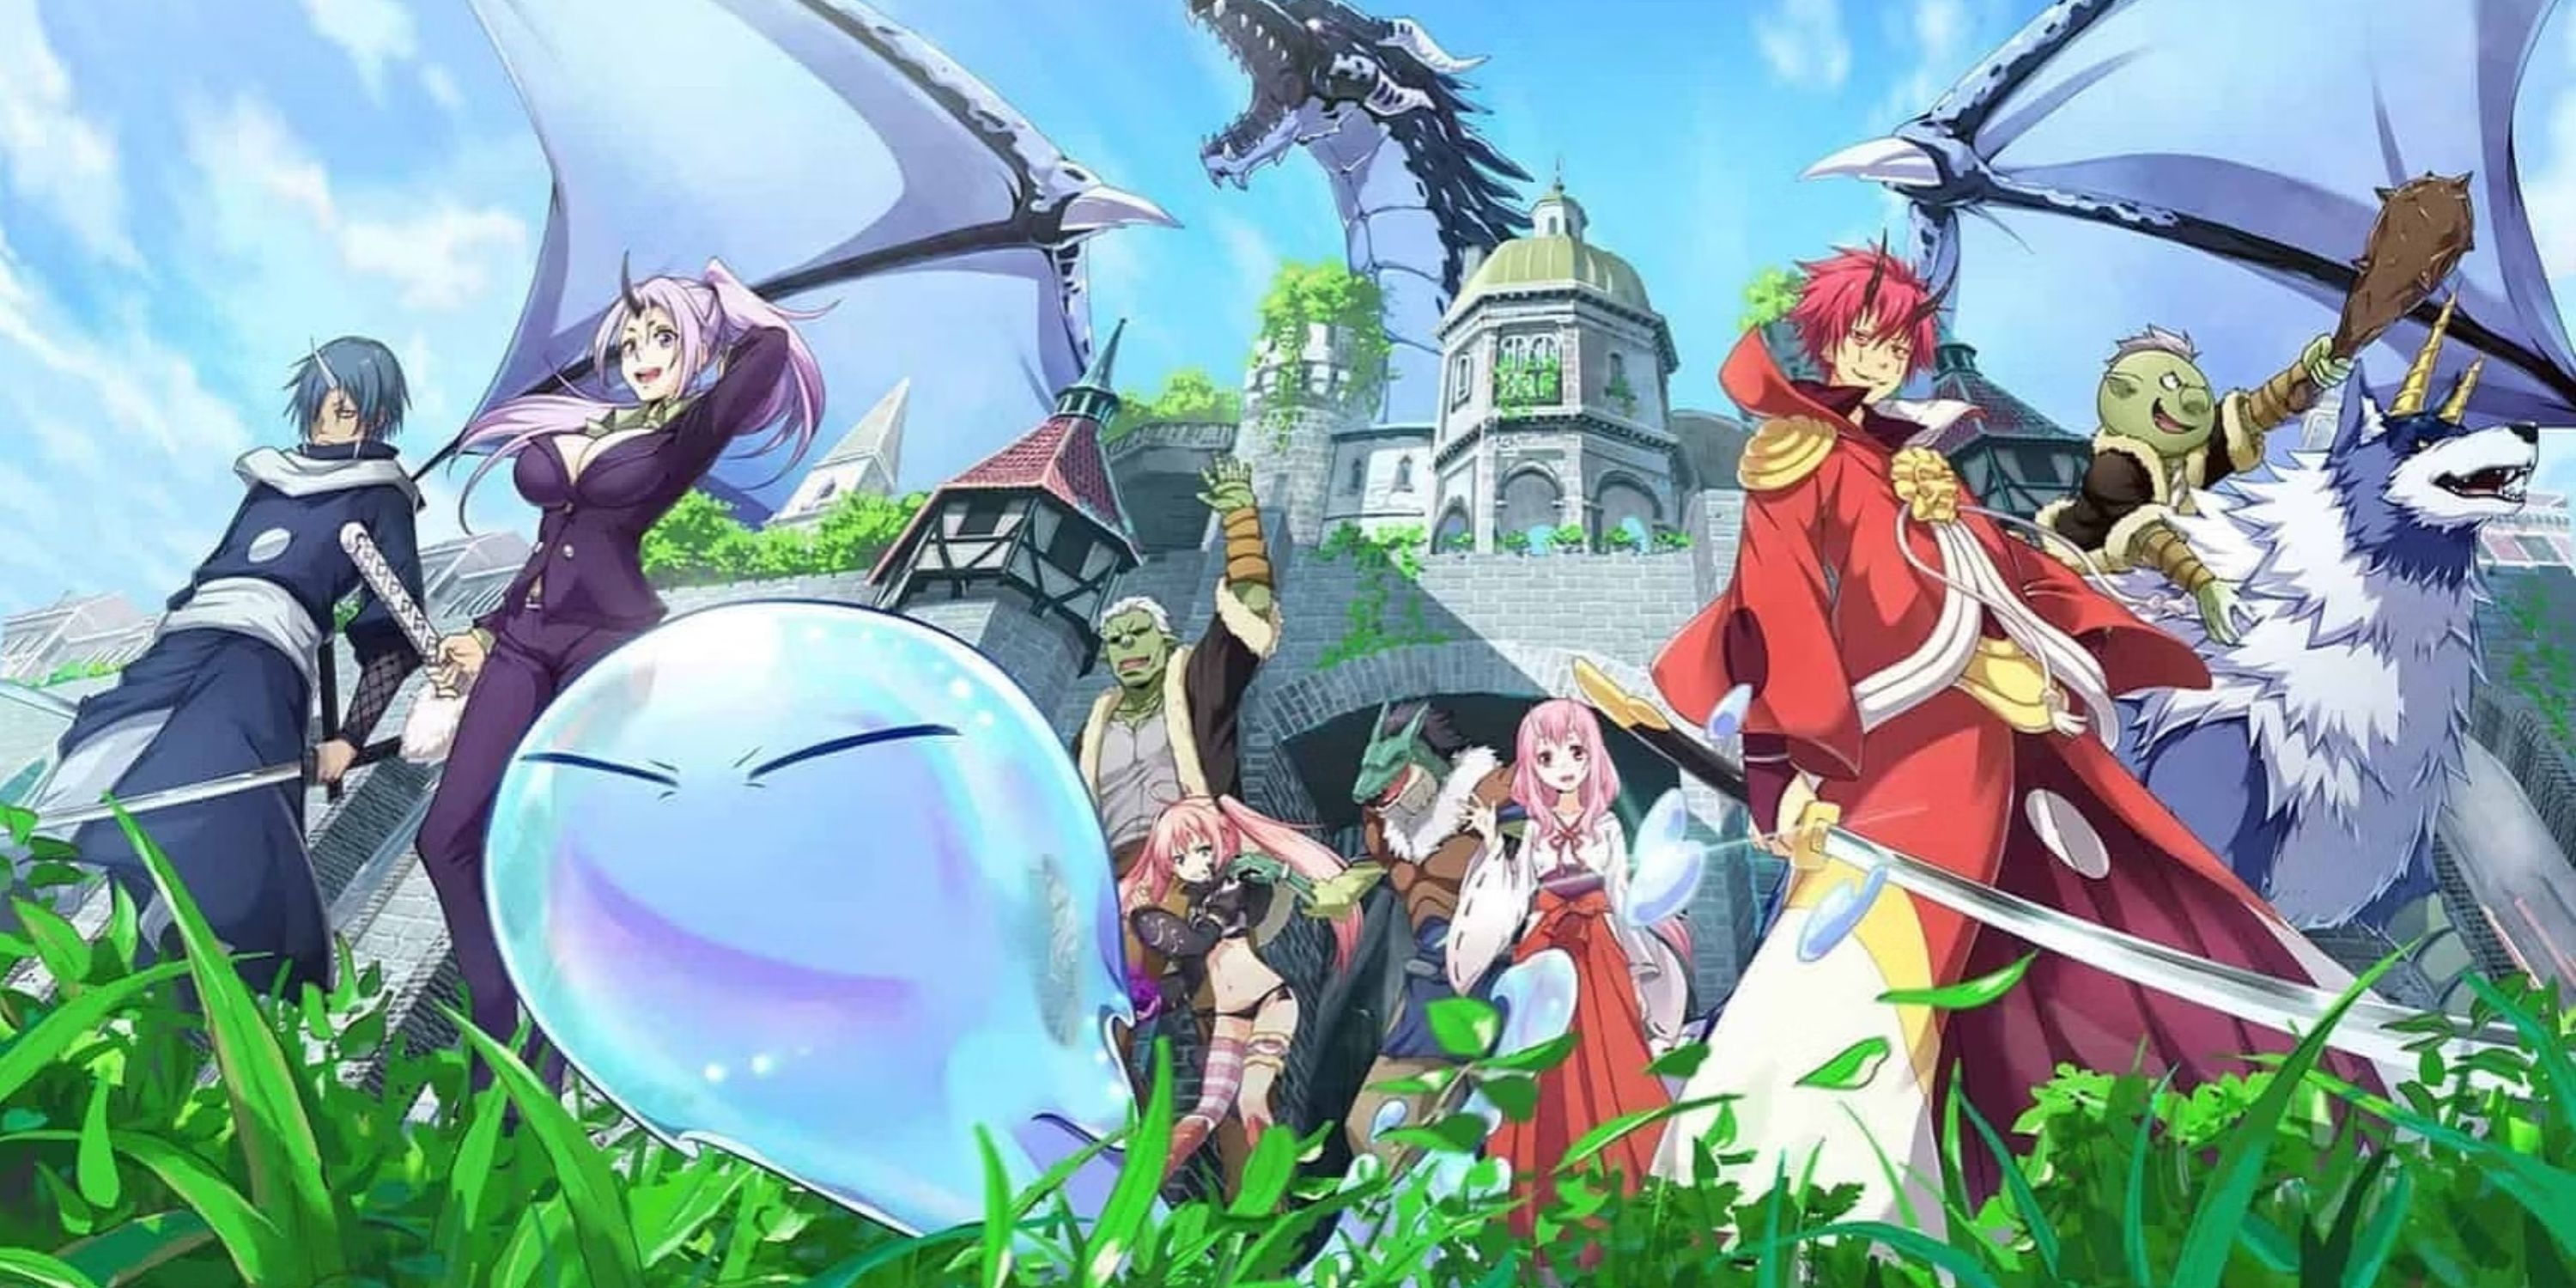 That Time I Got Reincarnated as a Slime Season 1 characters in front of a dragon and castle